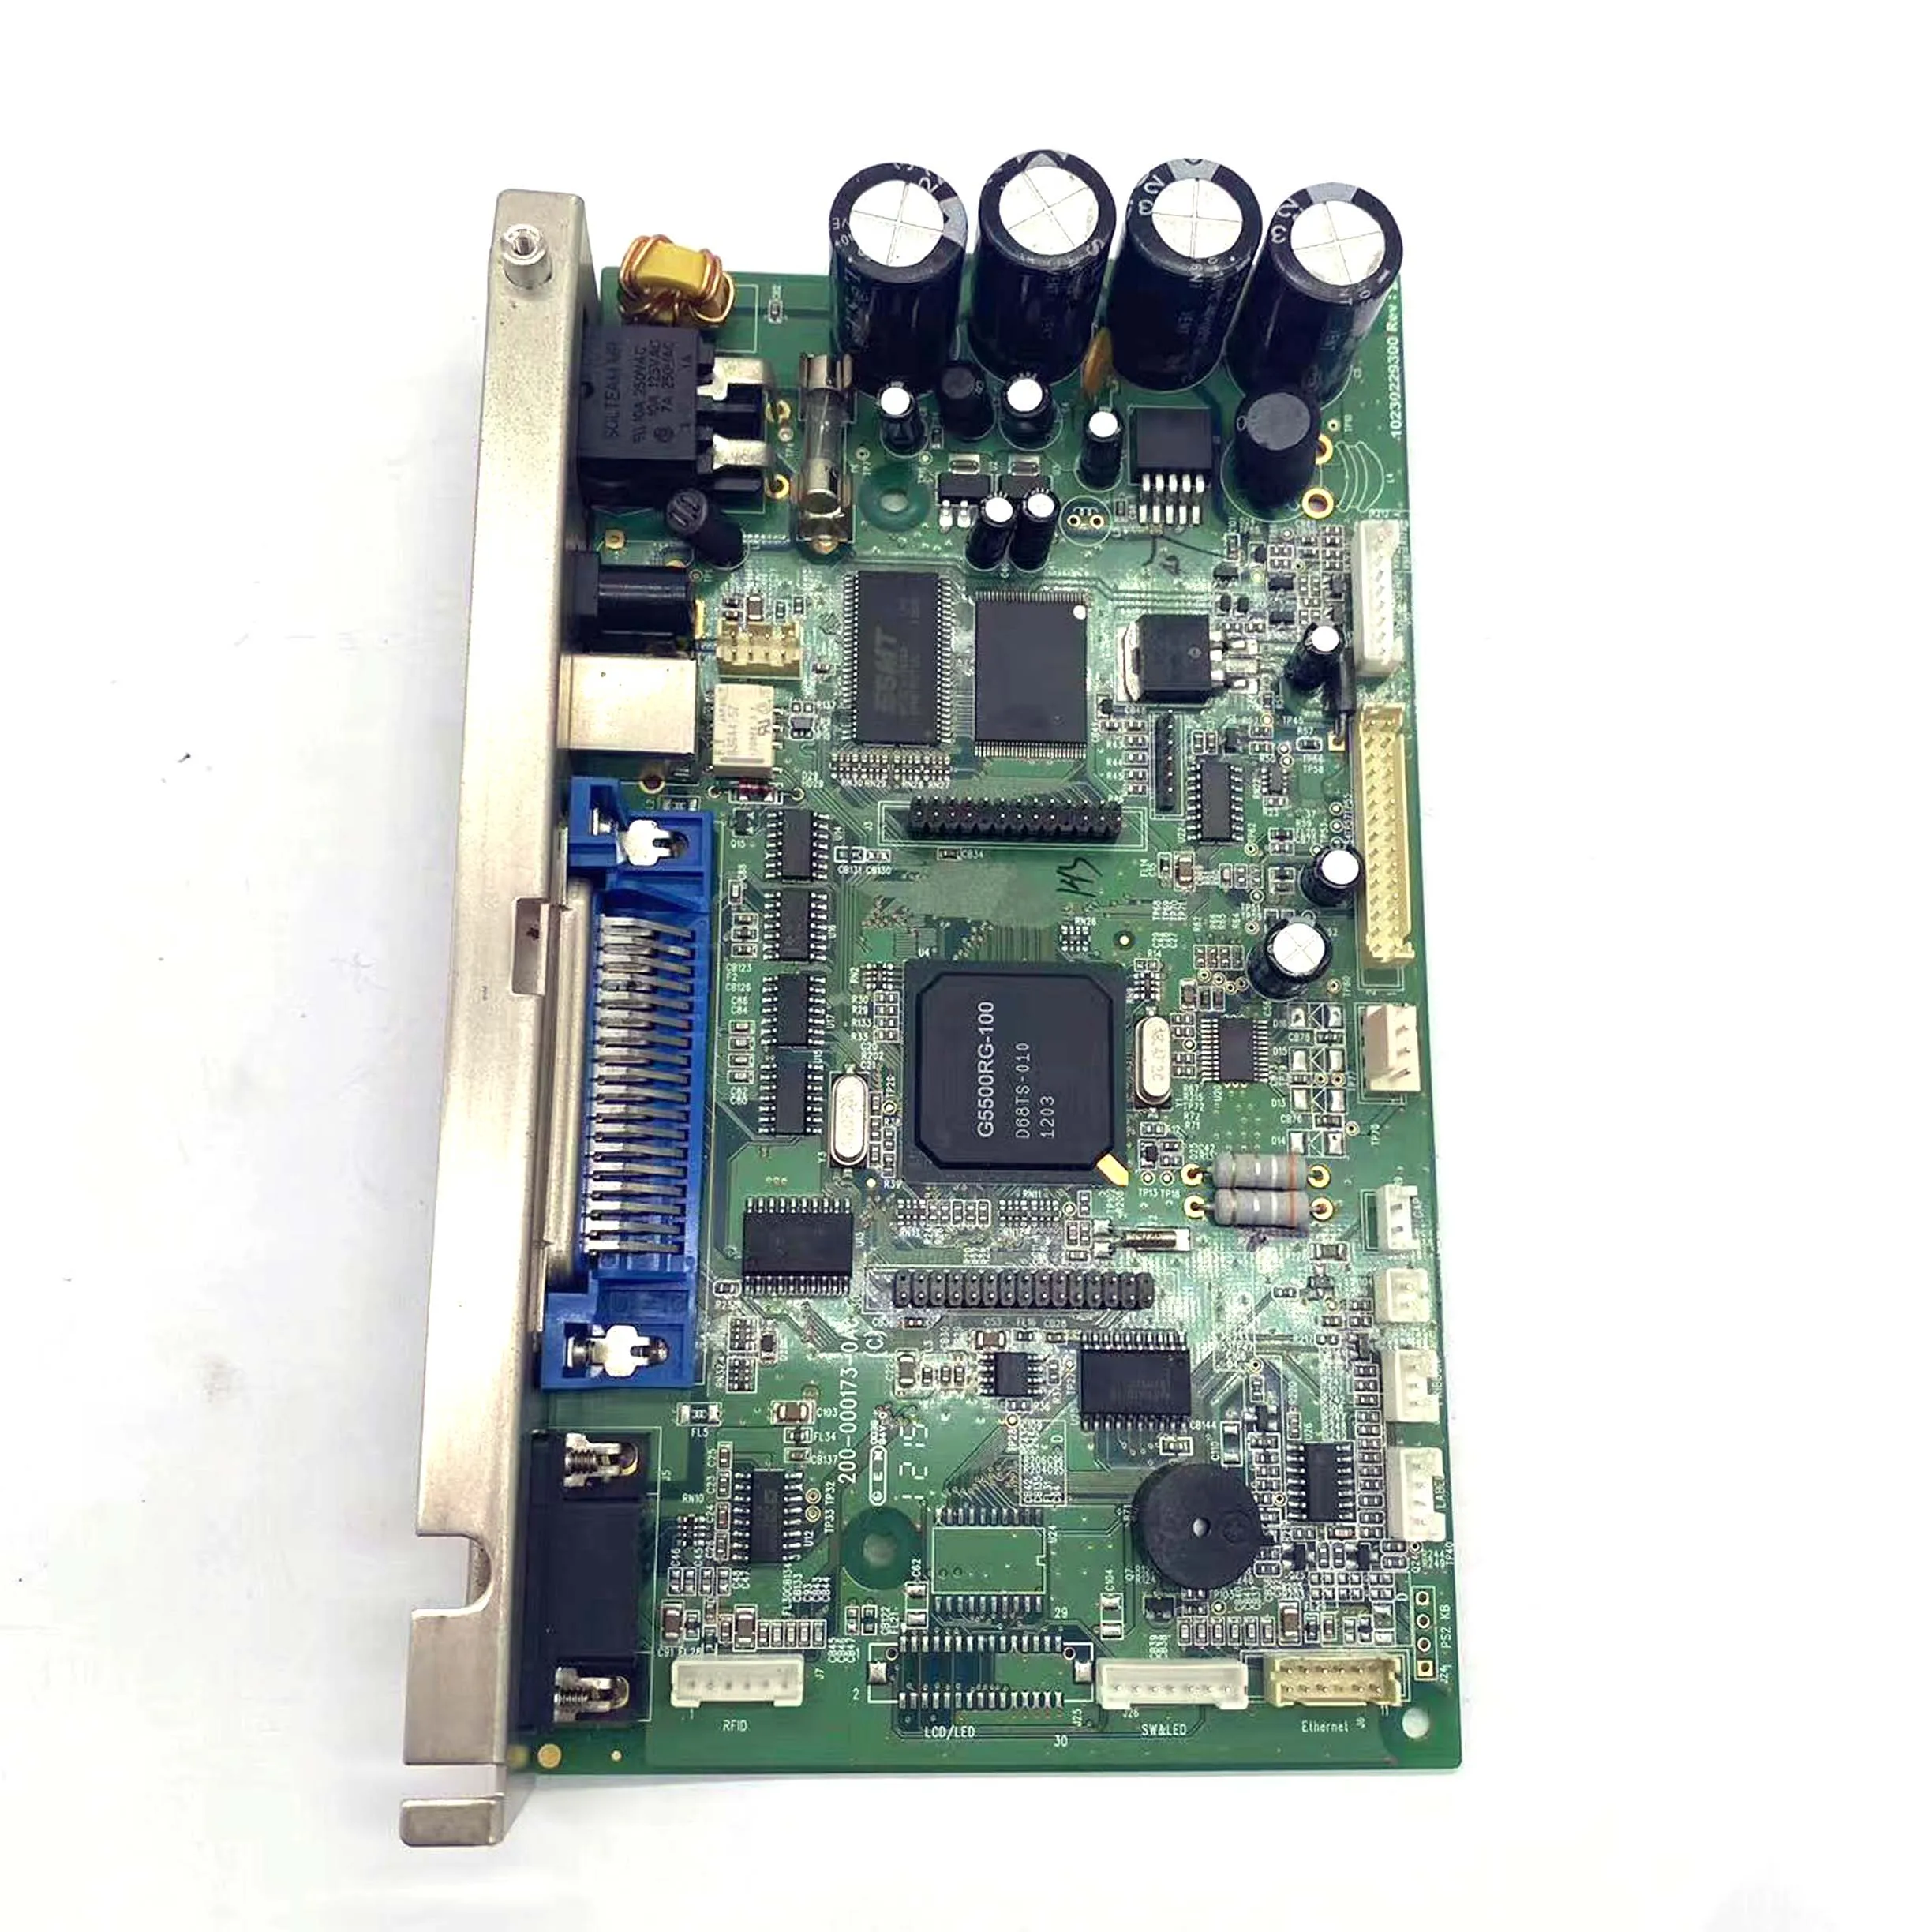 

Main Board Motherboard 200-000173-0A0 Fits For Godex EZ-1100PLUS